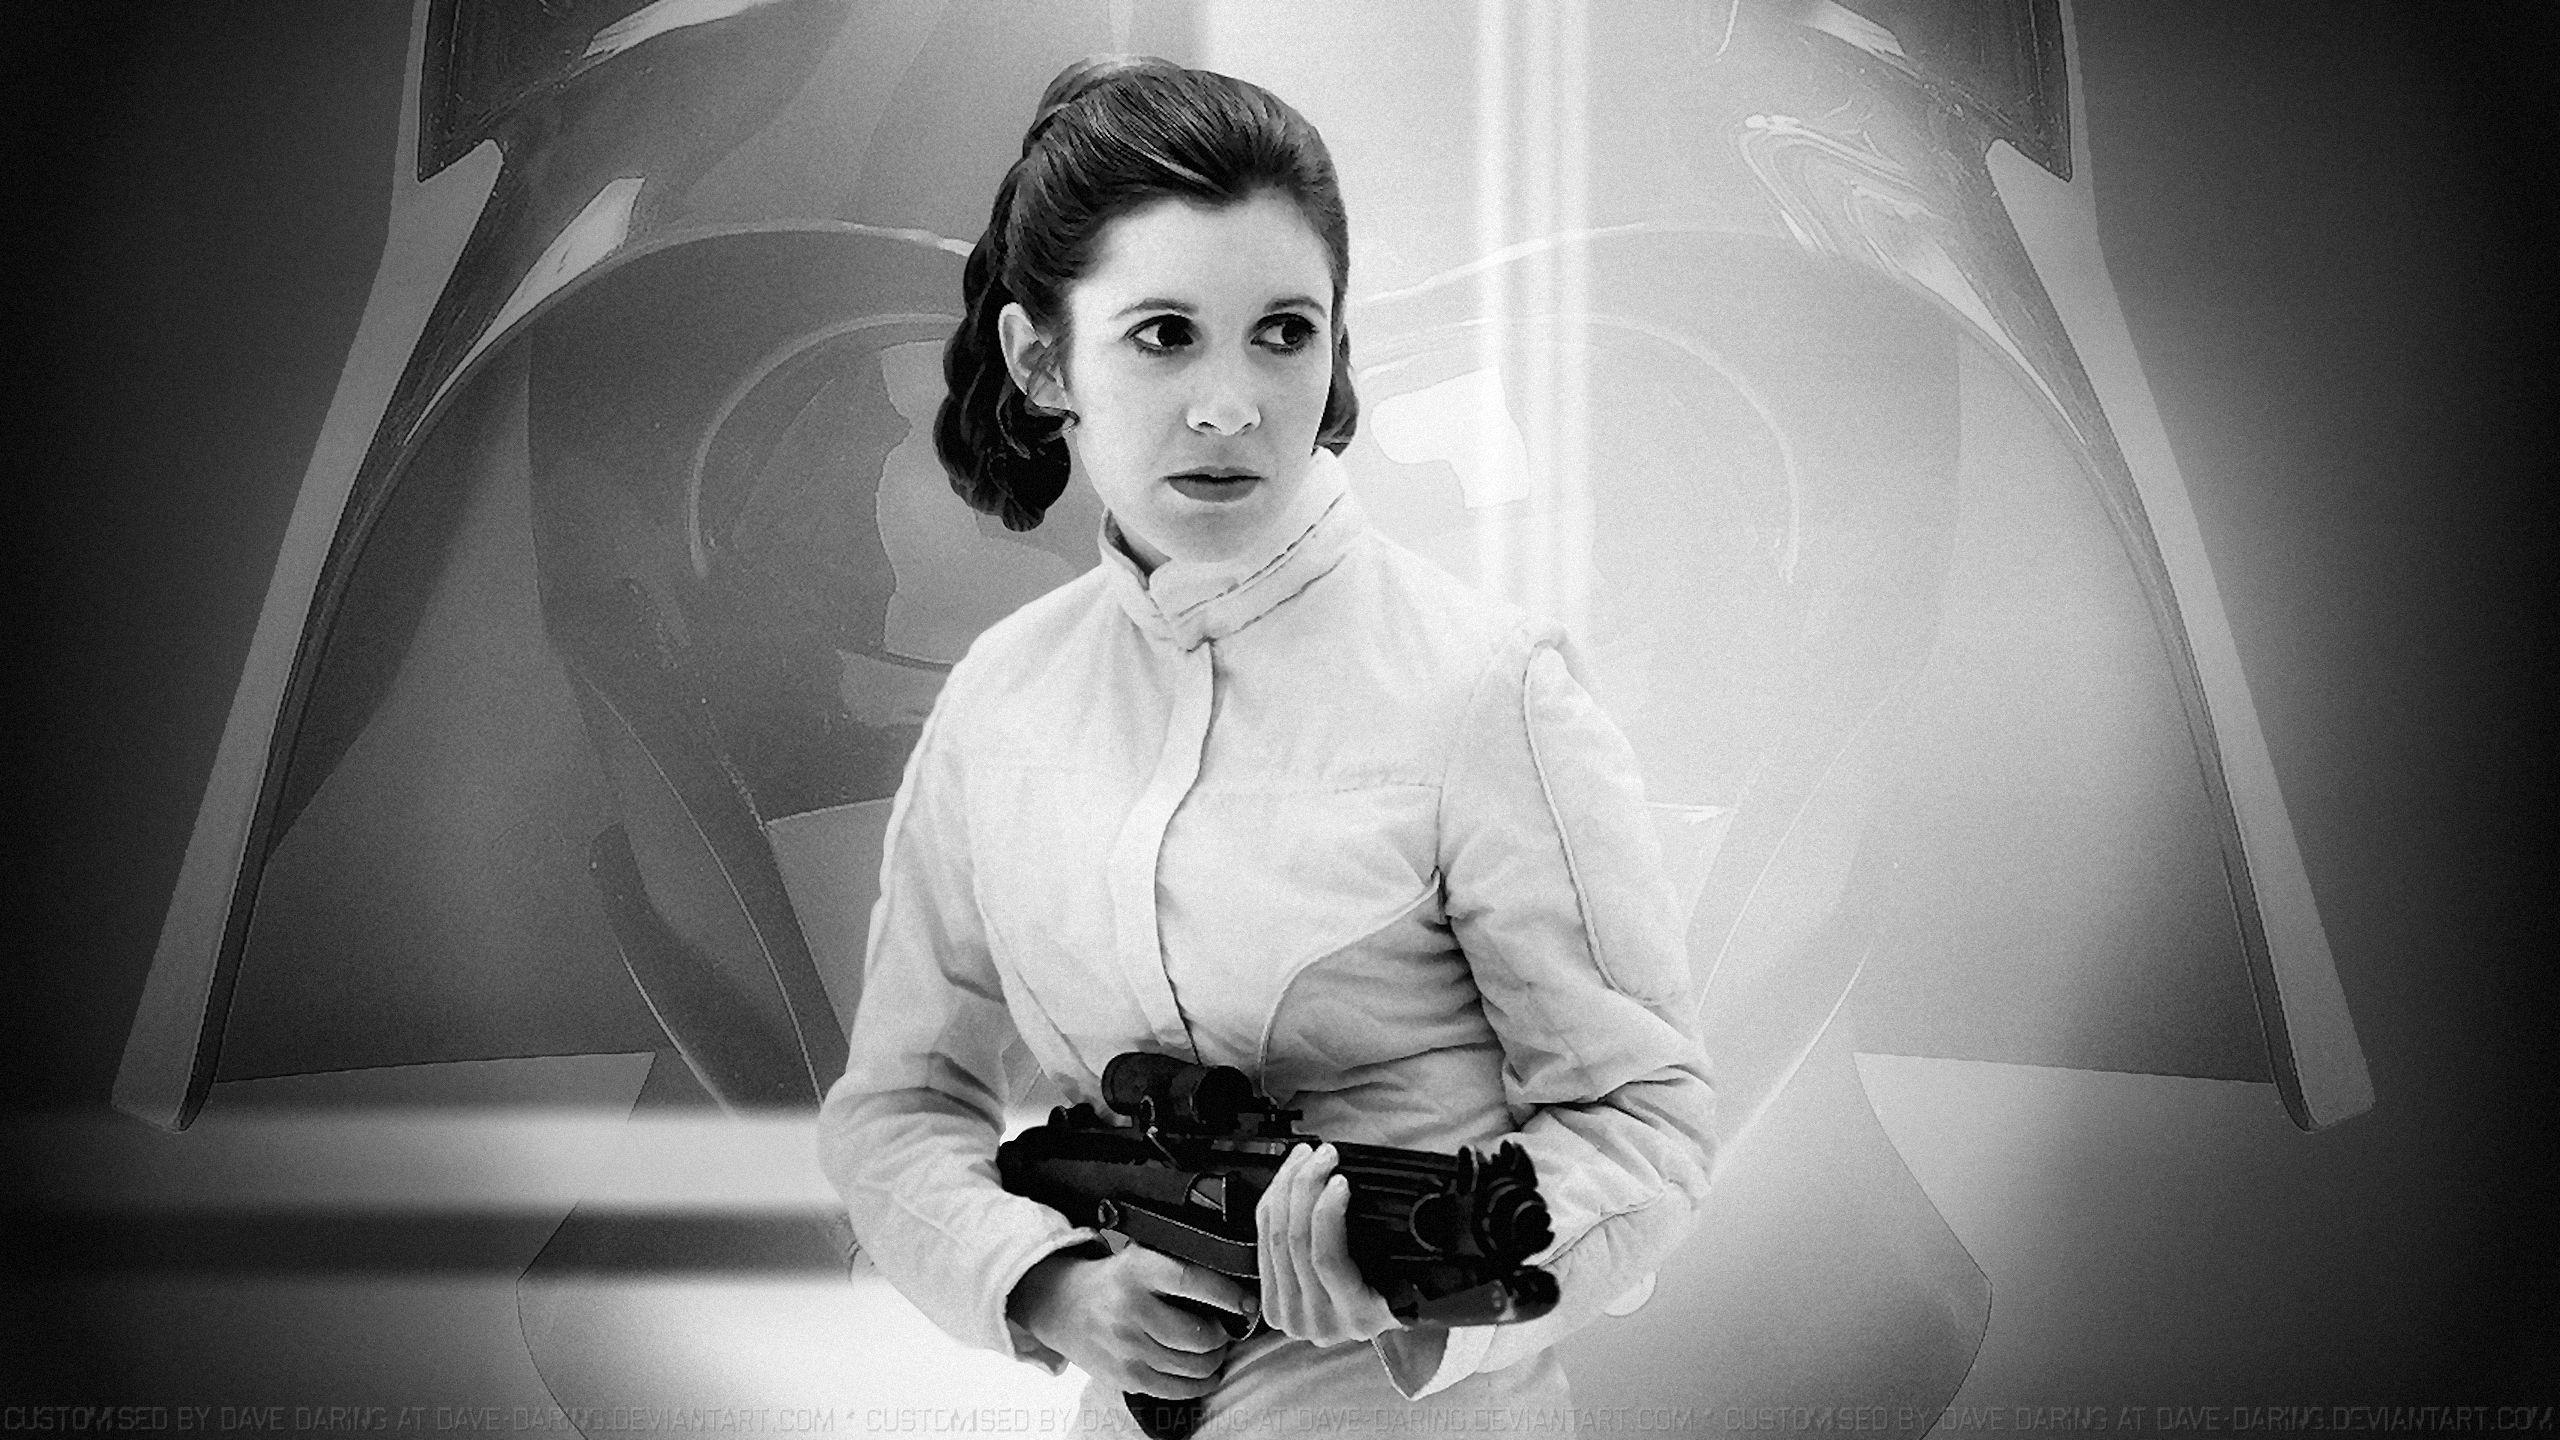 Carrie Fisher Princess Leia XLV V2 By Dave Daring